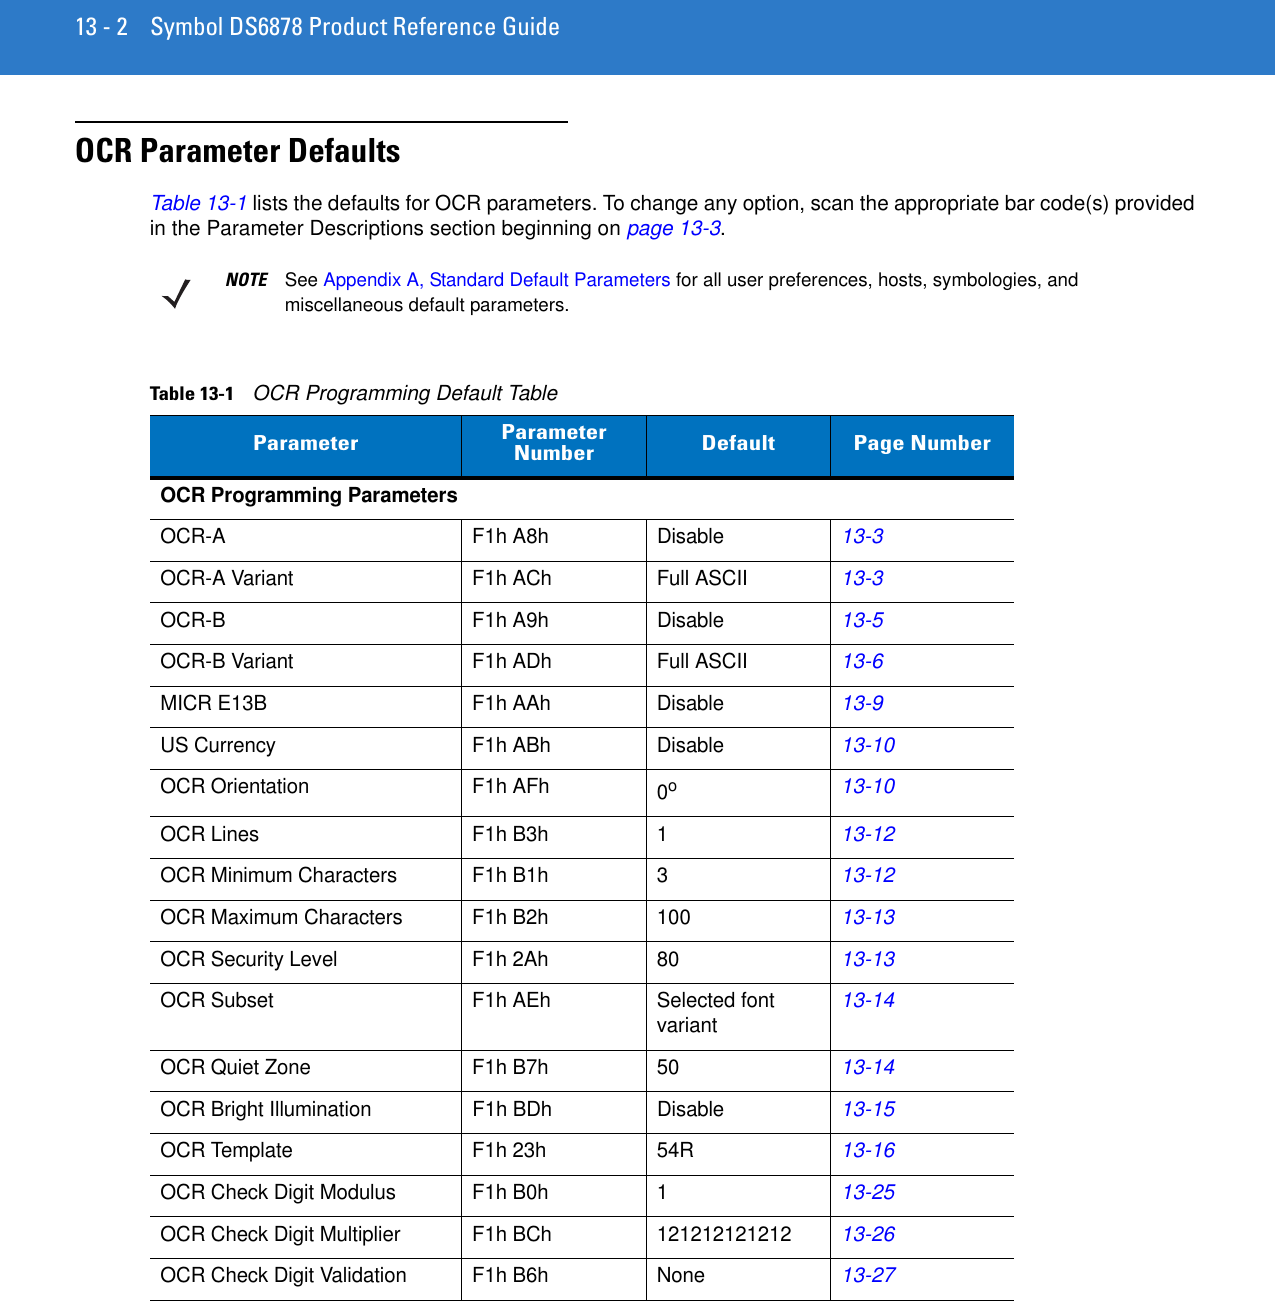 13 - 2 Symbol DS6878 Product Reference GuideOCR Parameter DefaultsTable 13-1 lists the defaults for OCR parameters. To change any option, scan the appropriate bar code(s) provided in the Parameter Descriptions section beginning on page 13-3.NOTE See Appendix A, Standard Default Parameters for all user preferences, hosts, symbologies, and miscellaneous default parameters.Table 13-1    OCR Programming Default TableParameter  Parameter Number Default Page NumberOCR Programming ParametersOCR-A F1h A8h Disable13-3OCR-A Variant  F1h ACh Full ASCII13-3OCR-B F1h A9h Disable13-5OCR-B Variant  F1h ADh Full ASCII13-6MICR E13B  F1h AAh Disable13-9US Currency  F1h ABh Disable13-10OCR Orientation  F1h AFh 0o13-10OCR Lines  F1h B3h 113-12OCR Minimum Characters  F1h B1h 313-12OCR Maximum Characters  F1h B2h 10013-13OCR Security Level  F1h 2Ah 8013-13OCR Subset  F1h AEh Selected font variant13-14OCR Quiet Zone  F1h B7h 5013-14OCR Bright Illumination  F1h BDh Disable13-15OCR Template  F1h 23h 54R13-16OCR Check Digit Modulus F1h B0h 113-25OCR Check Digit Multiplier  F1h BCh 12121212121213-26OCR Check Digit Validation  F1h B6h None13-27